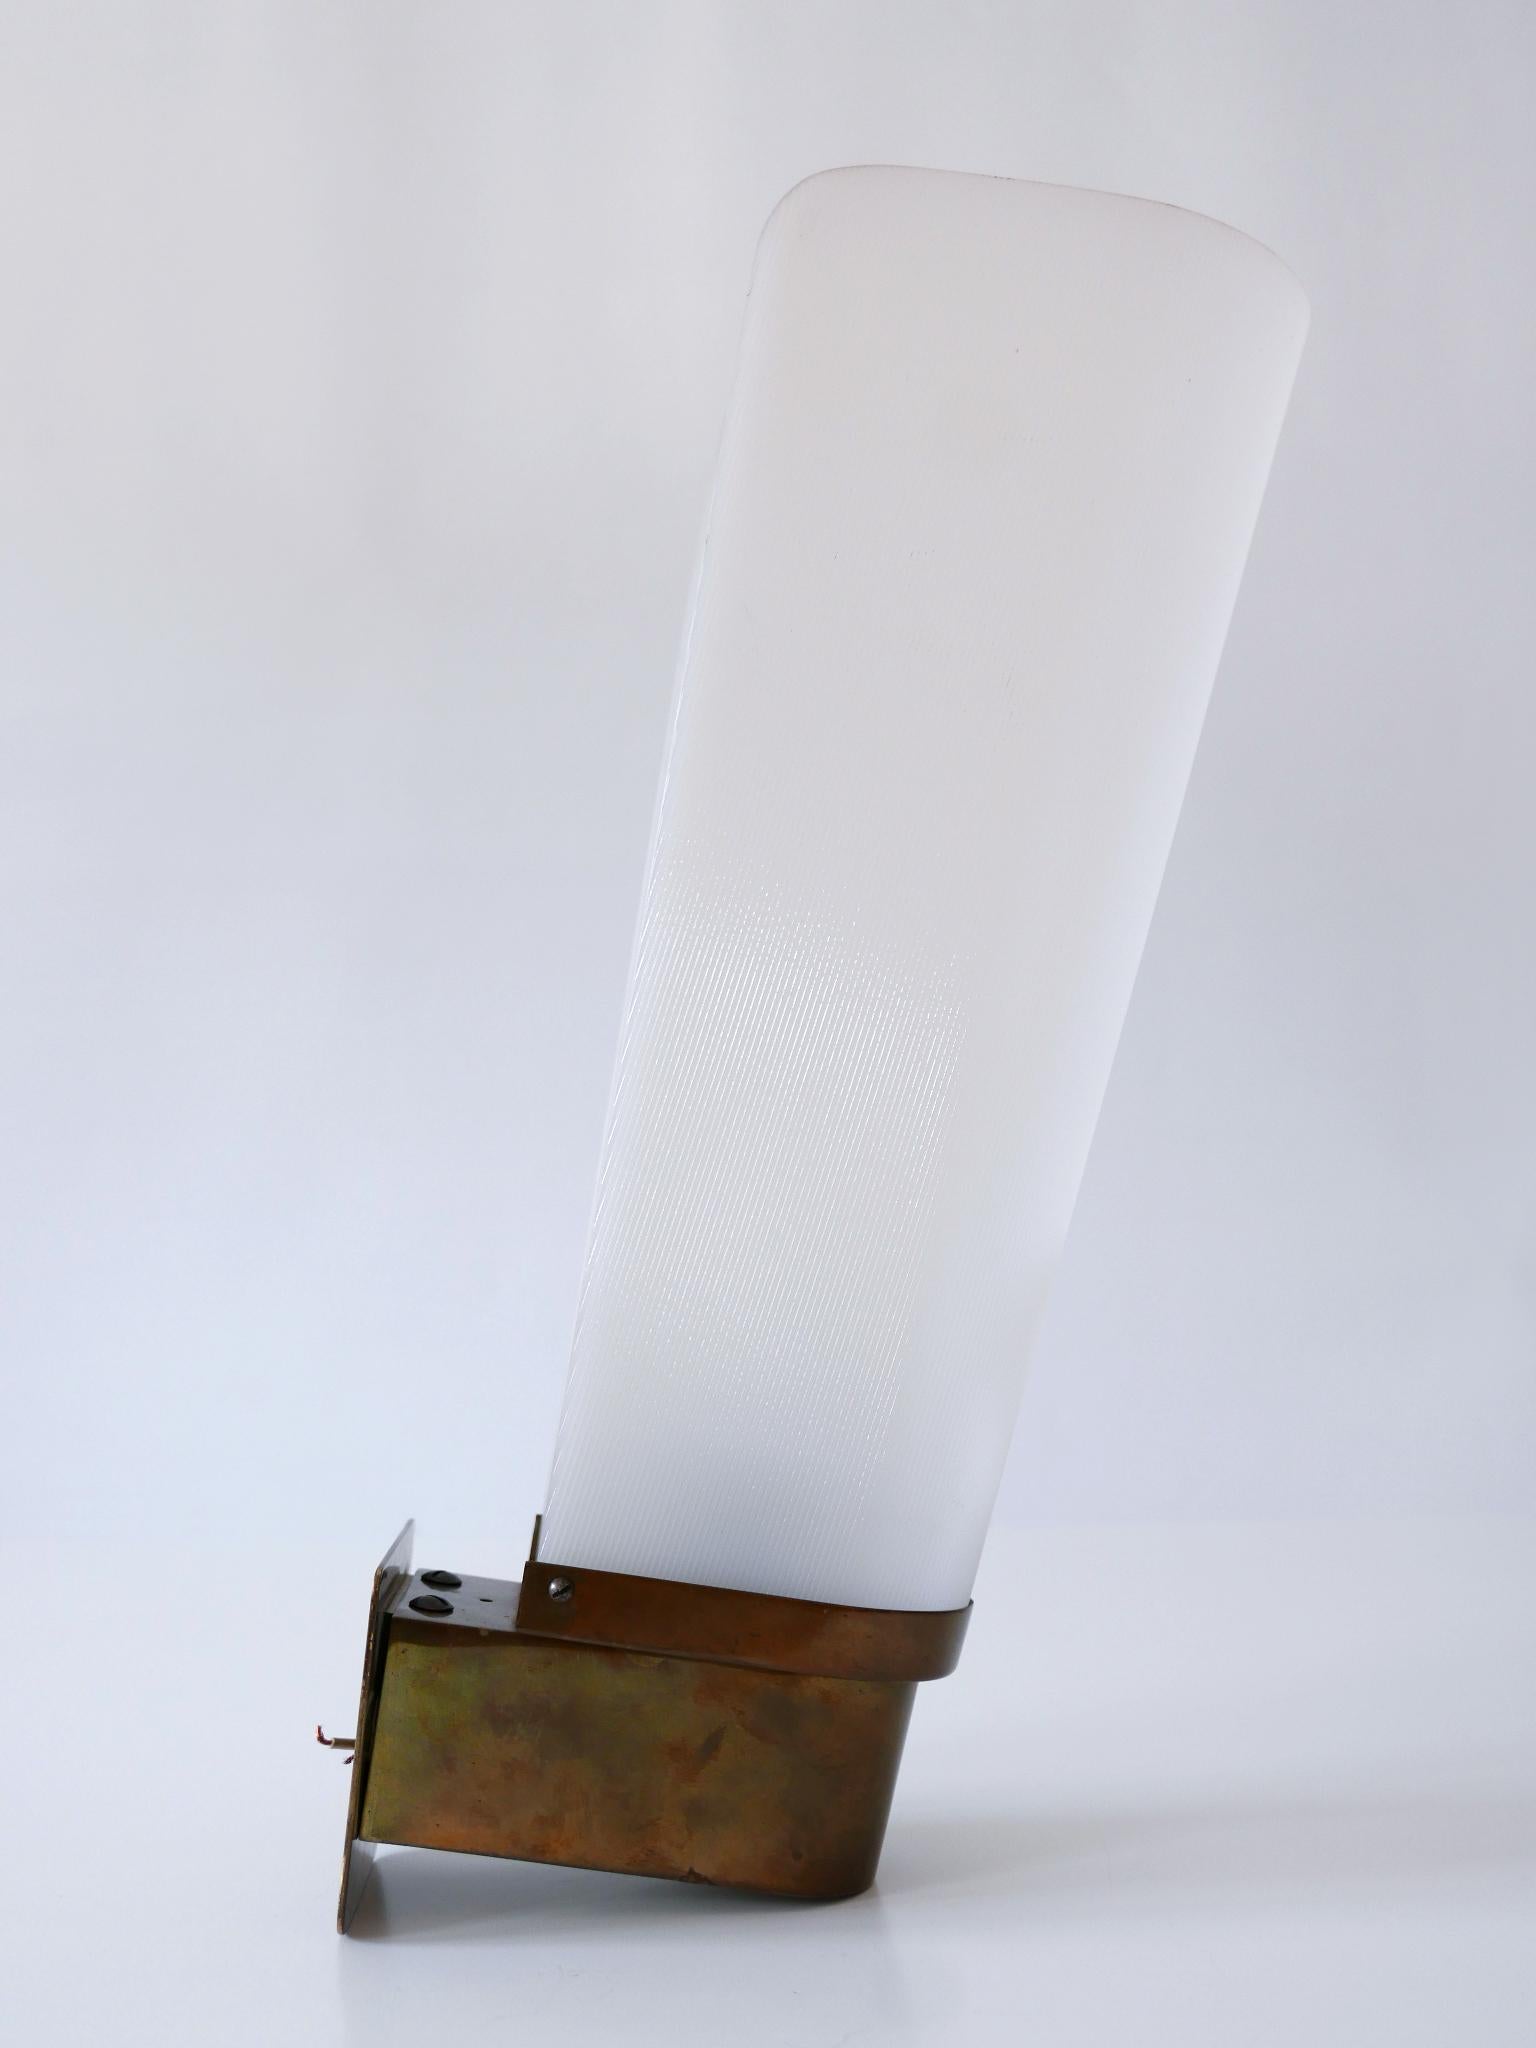 Large Mid-Century Modern Brass & Acrylic Wall Light or Sconce Germany 1950s For Sale 2